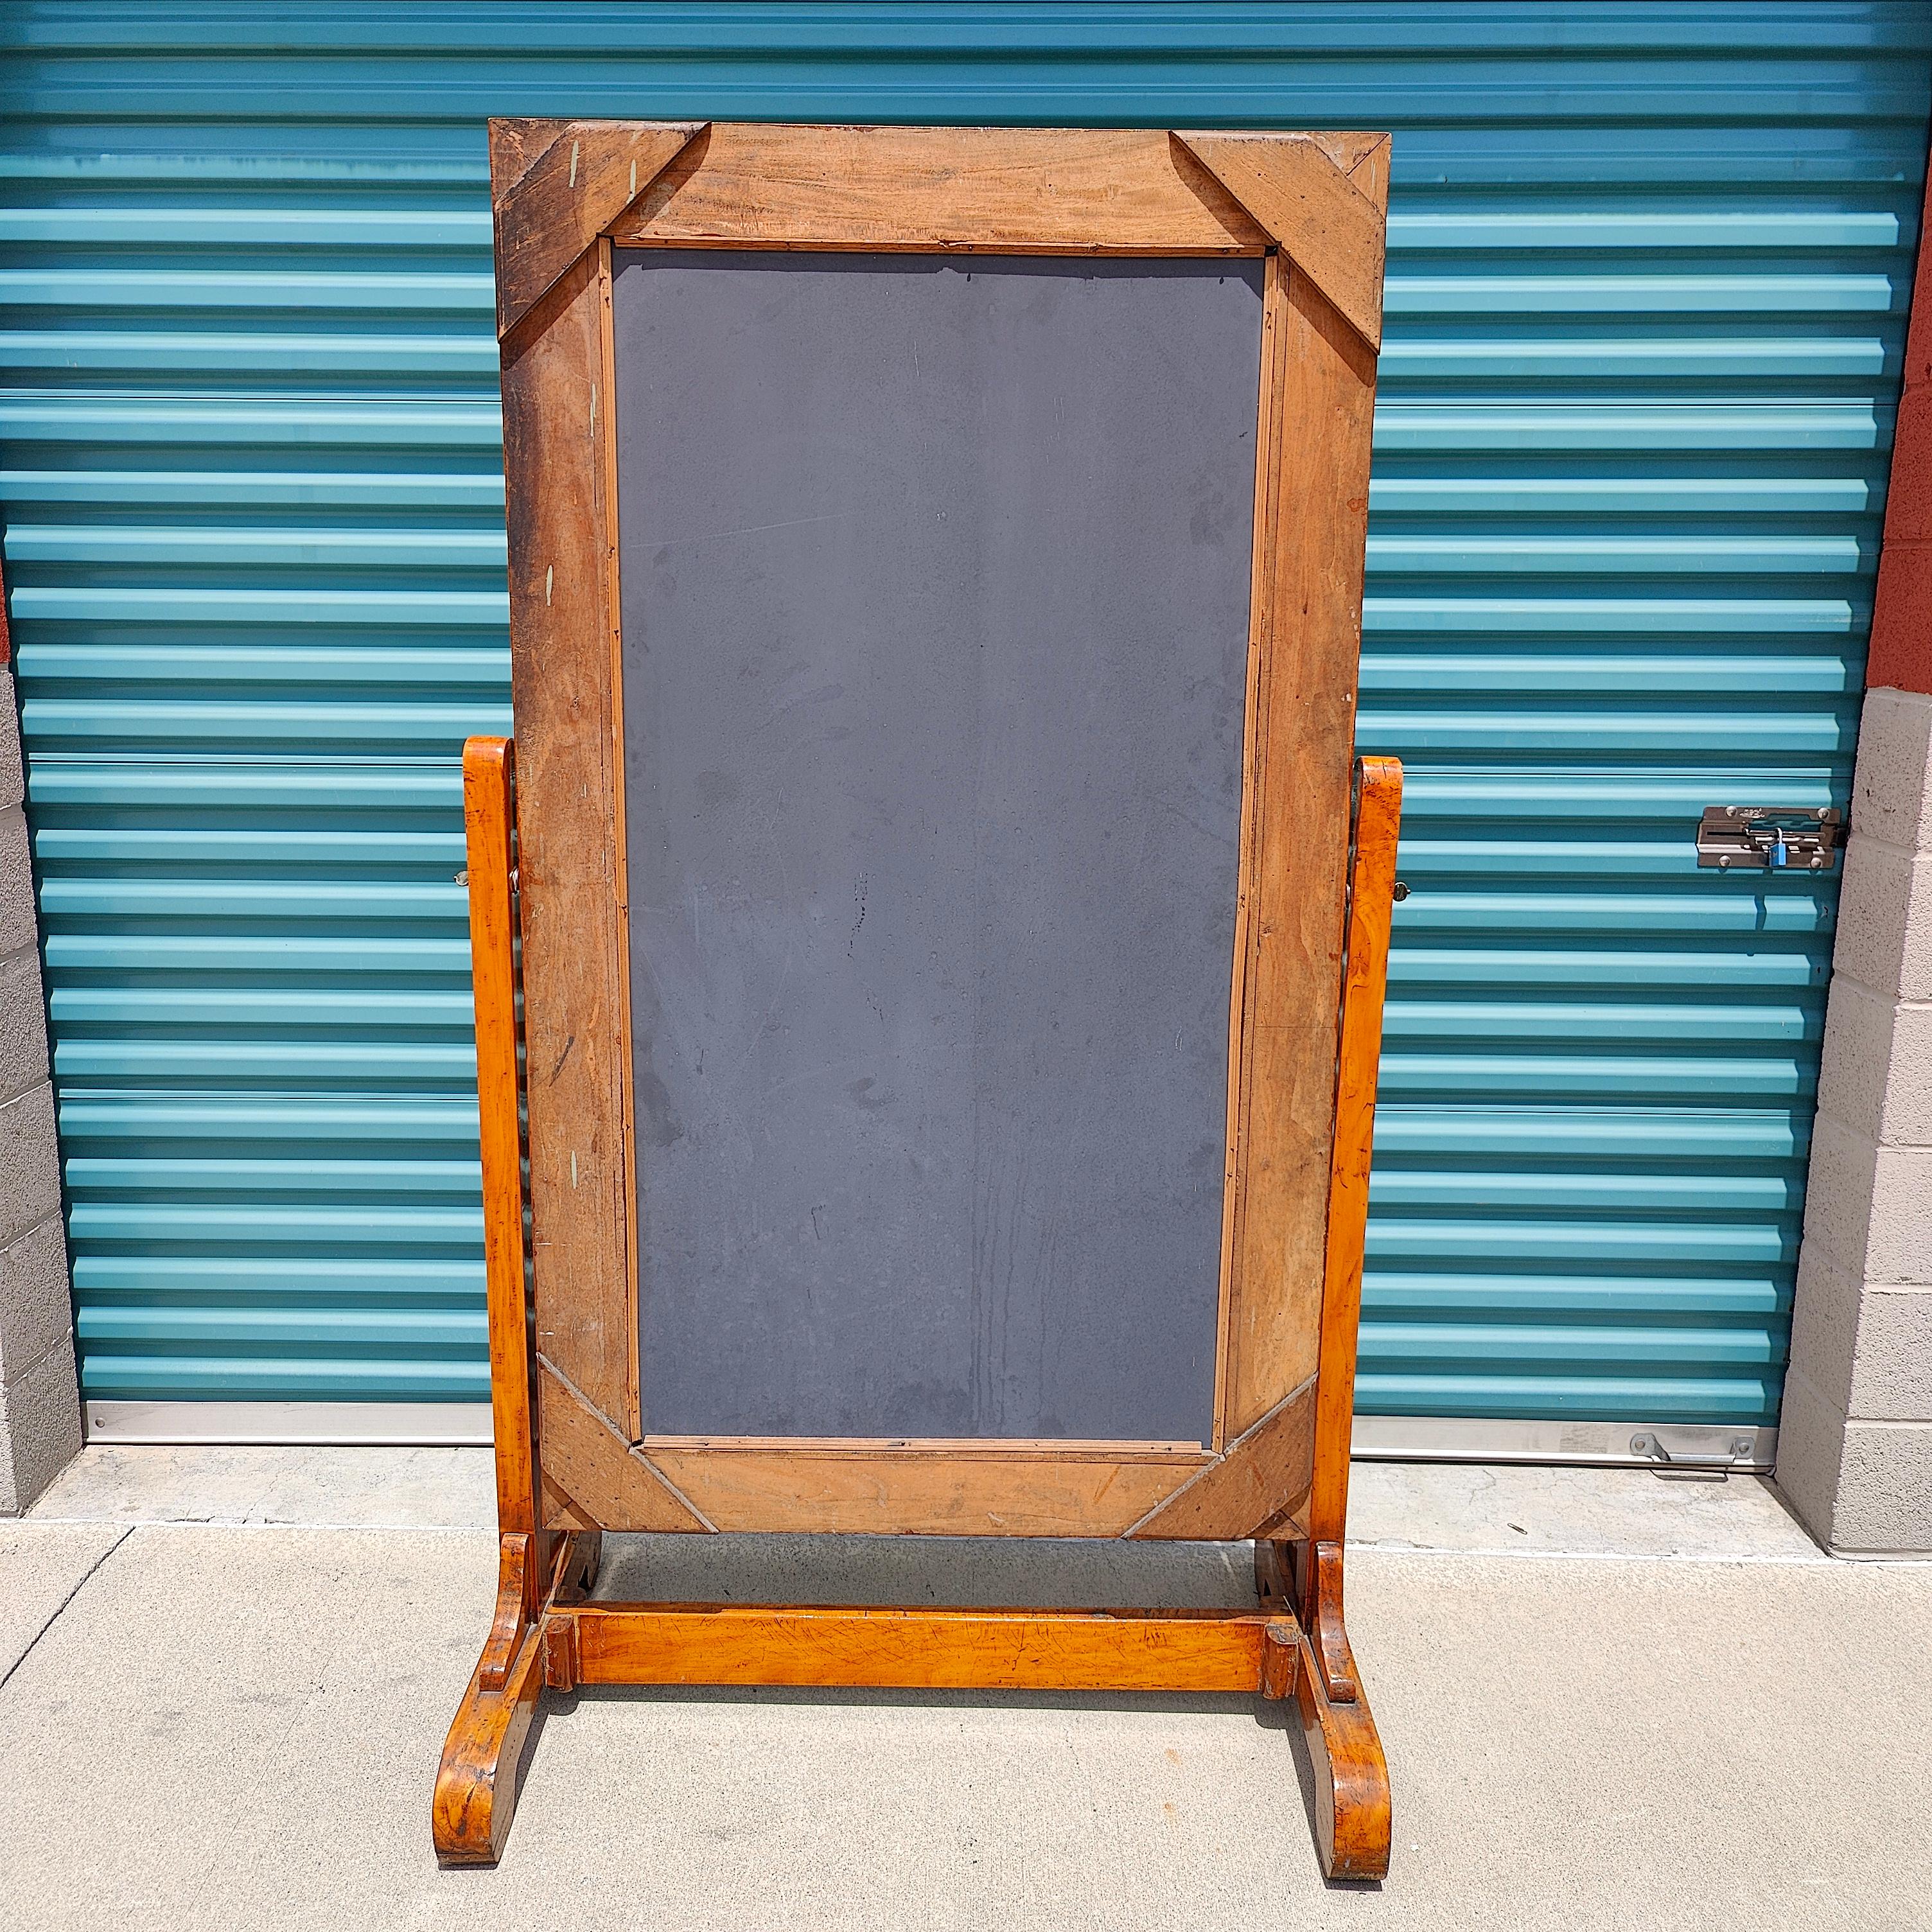 Just in, an antique rustic wood full length floor mirror with the perfect amount of patina on the hardware and wood frame! This beauty measures approximately 40w x 72h x 23.5d (at base). Mirror is held by one screw on each side with a couple of